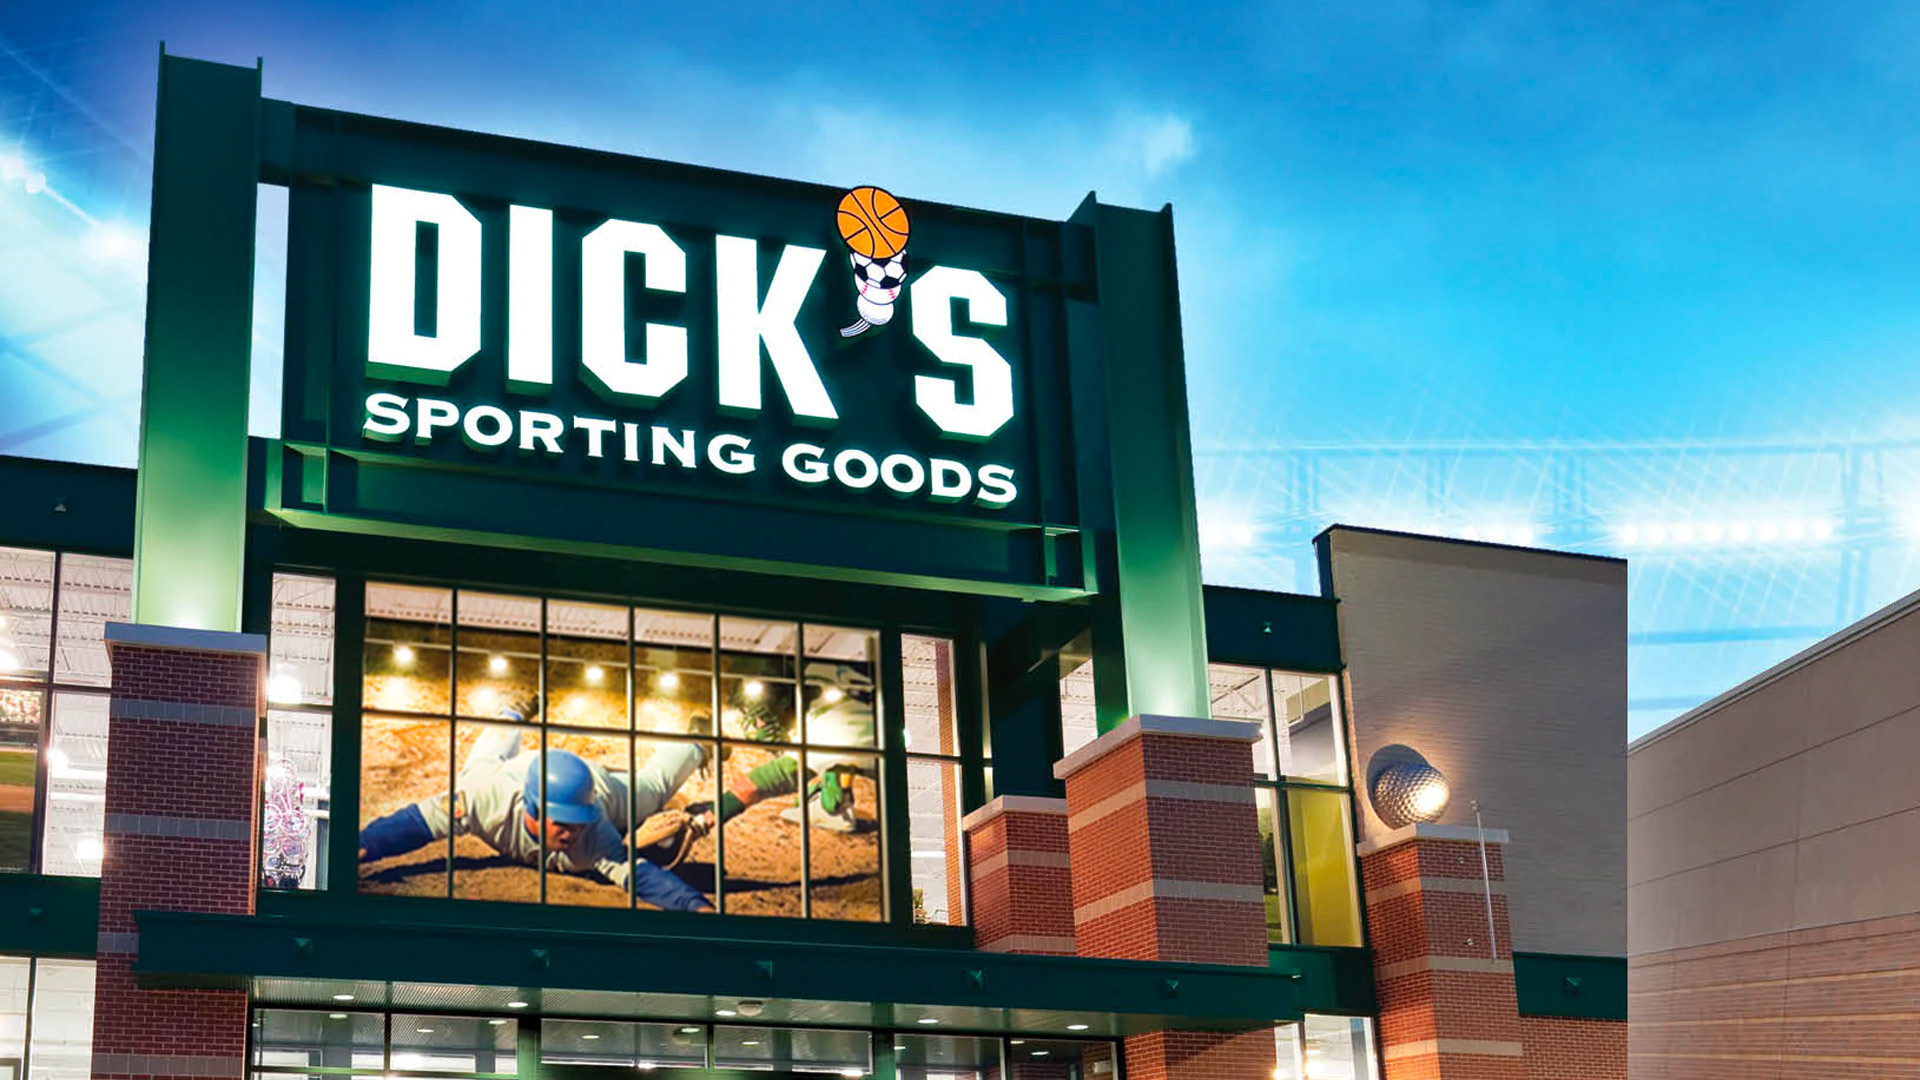 Dick's Sporting Goods Hours Locations, Opening & Closing Time